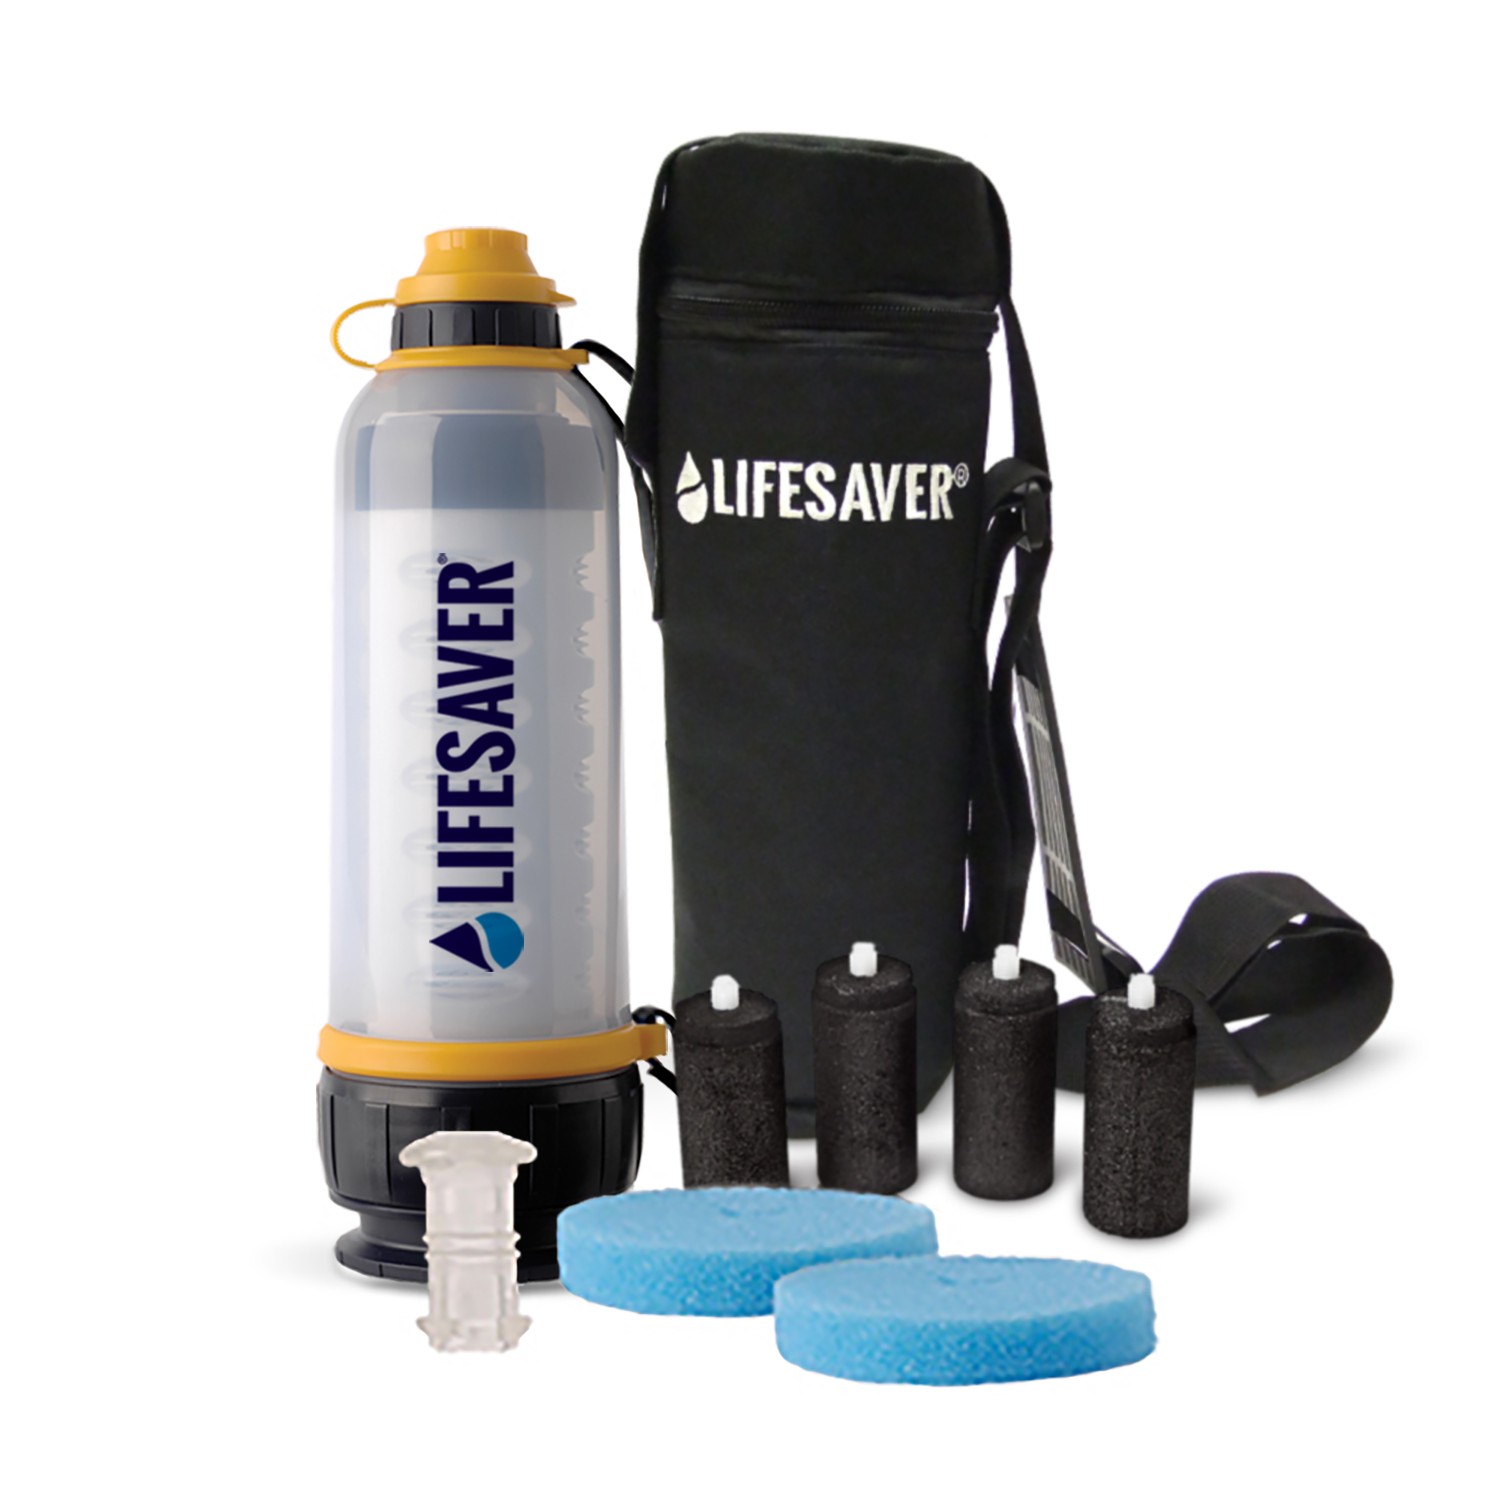 LIFESAVER® 4000UF WATER PURIFICATION DRINKING BOTTLE ULTIMATE SURVIVAL SPARES 